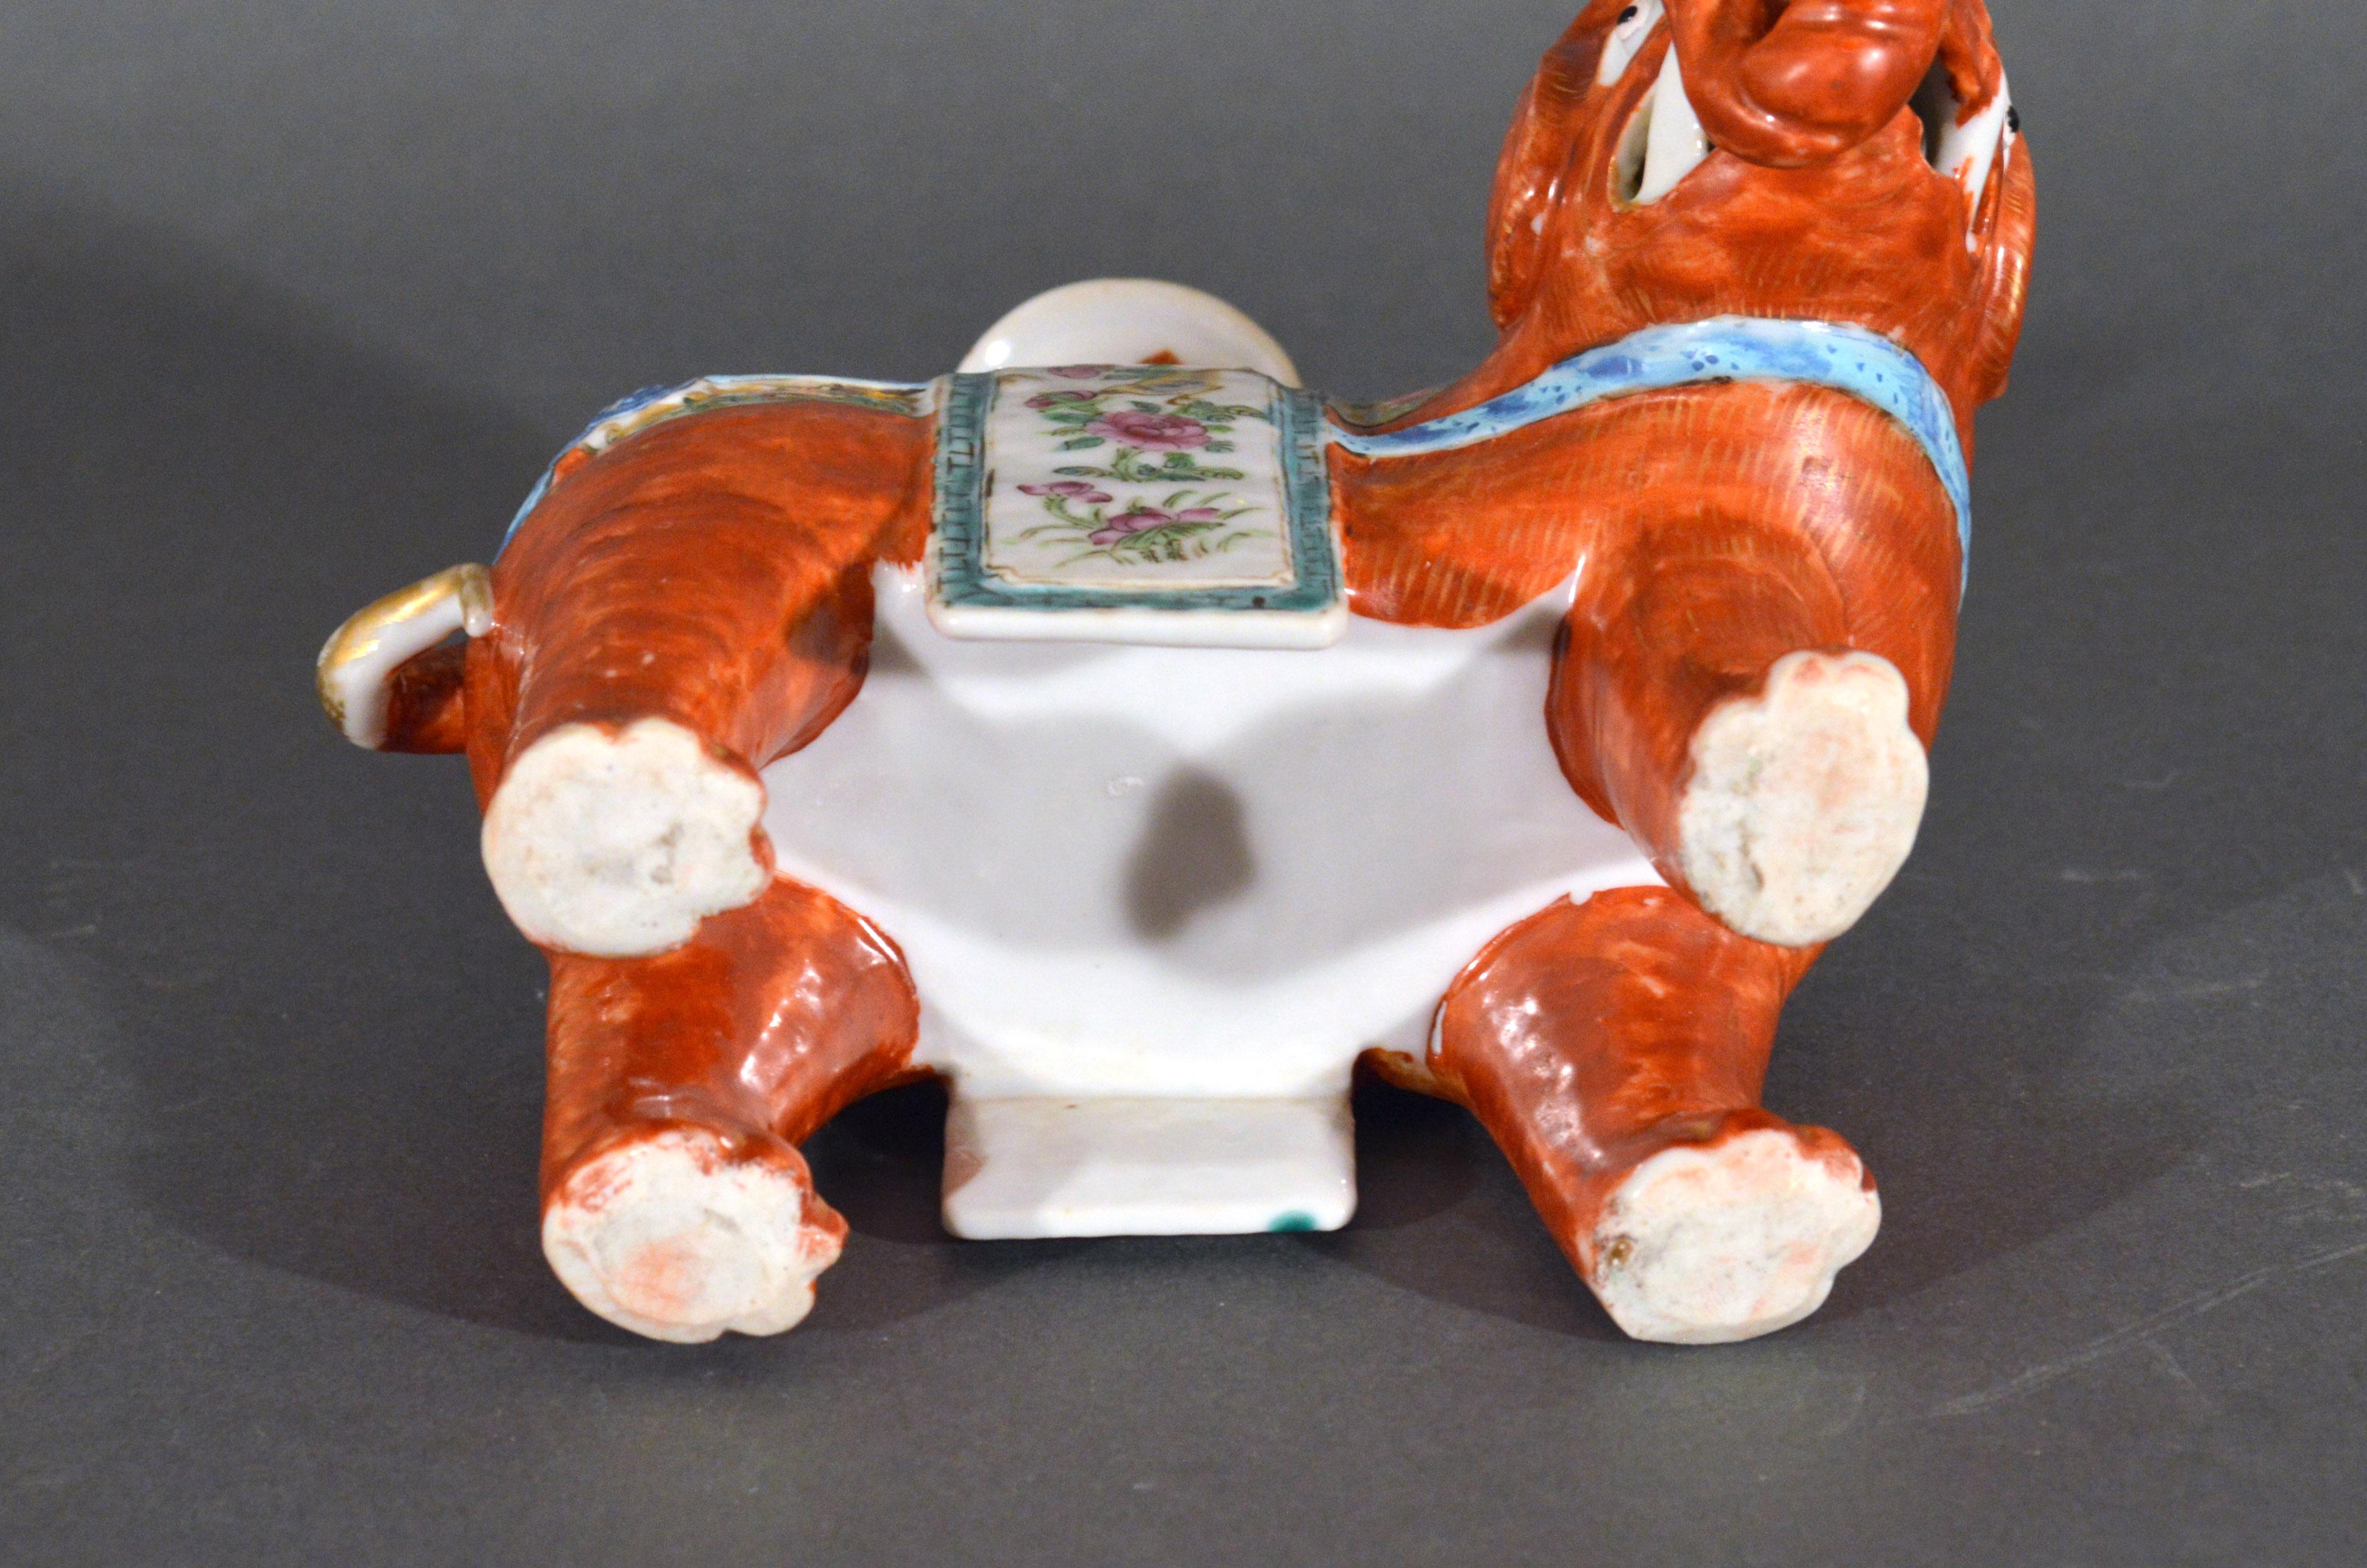 Chinese Export Porcelain Canton Famille Rose Elephant Modeled as a Candlestick For Sale 3